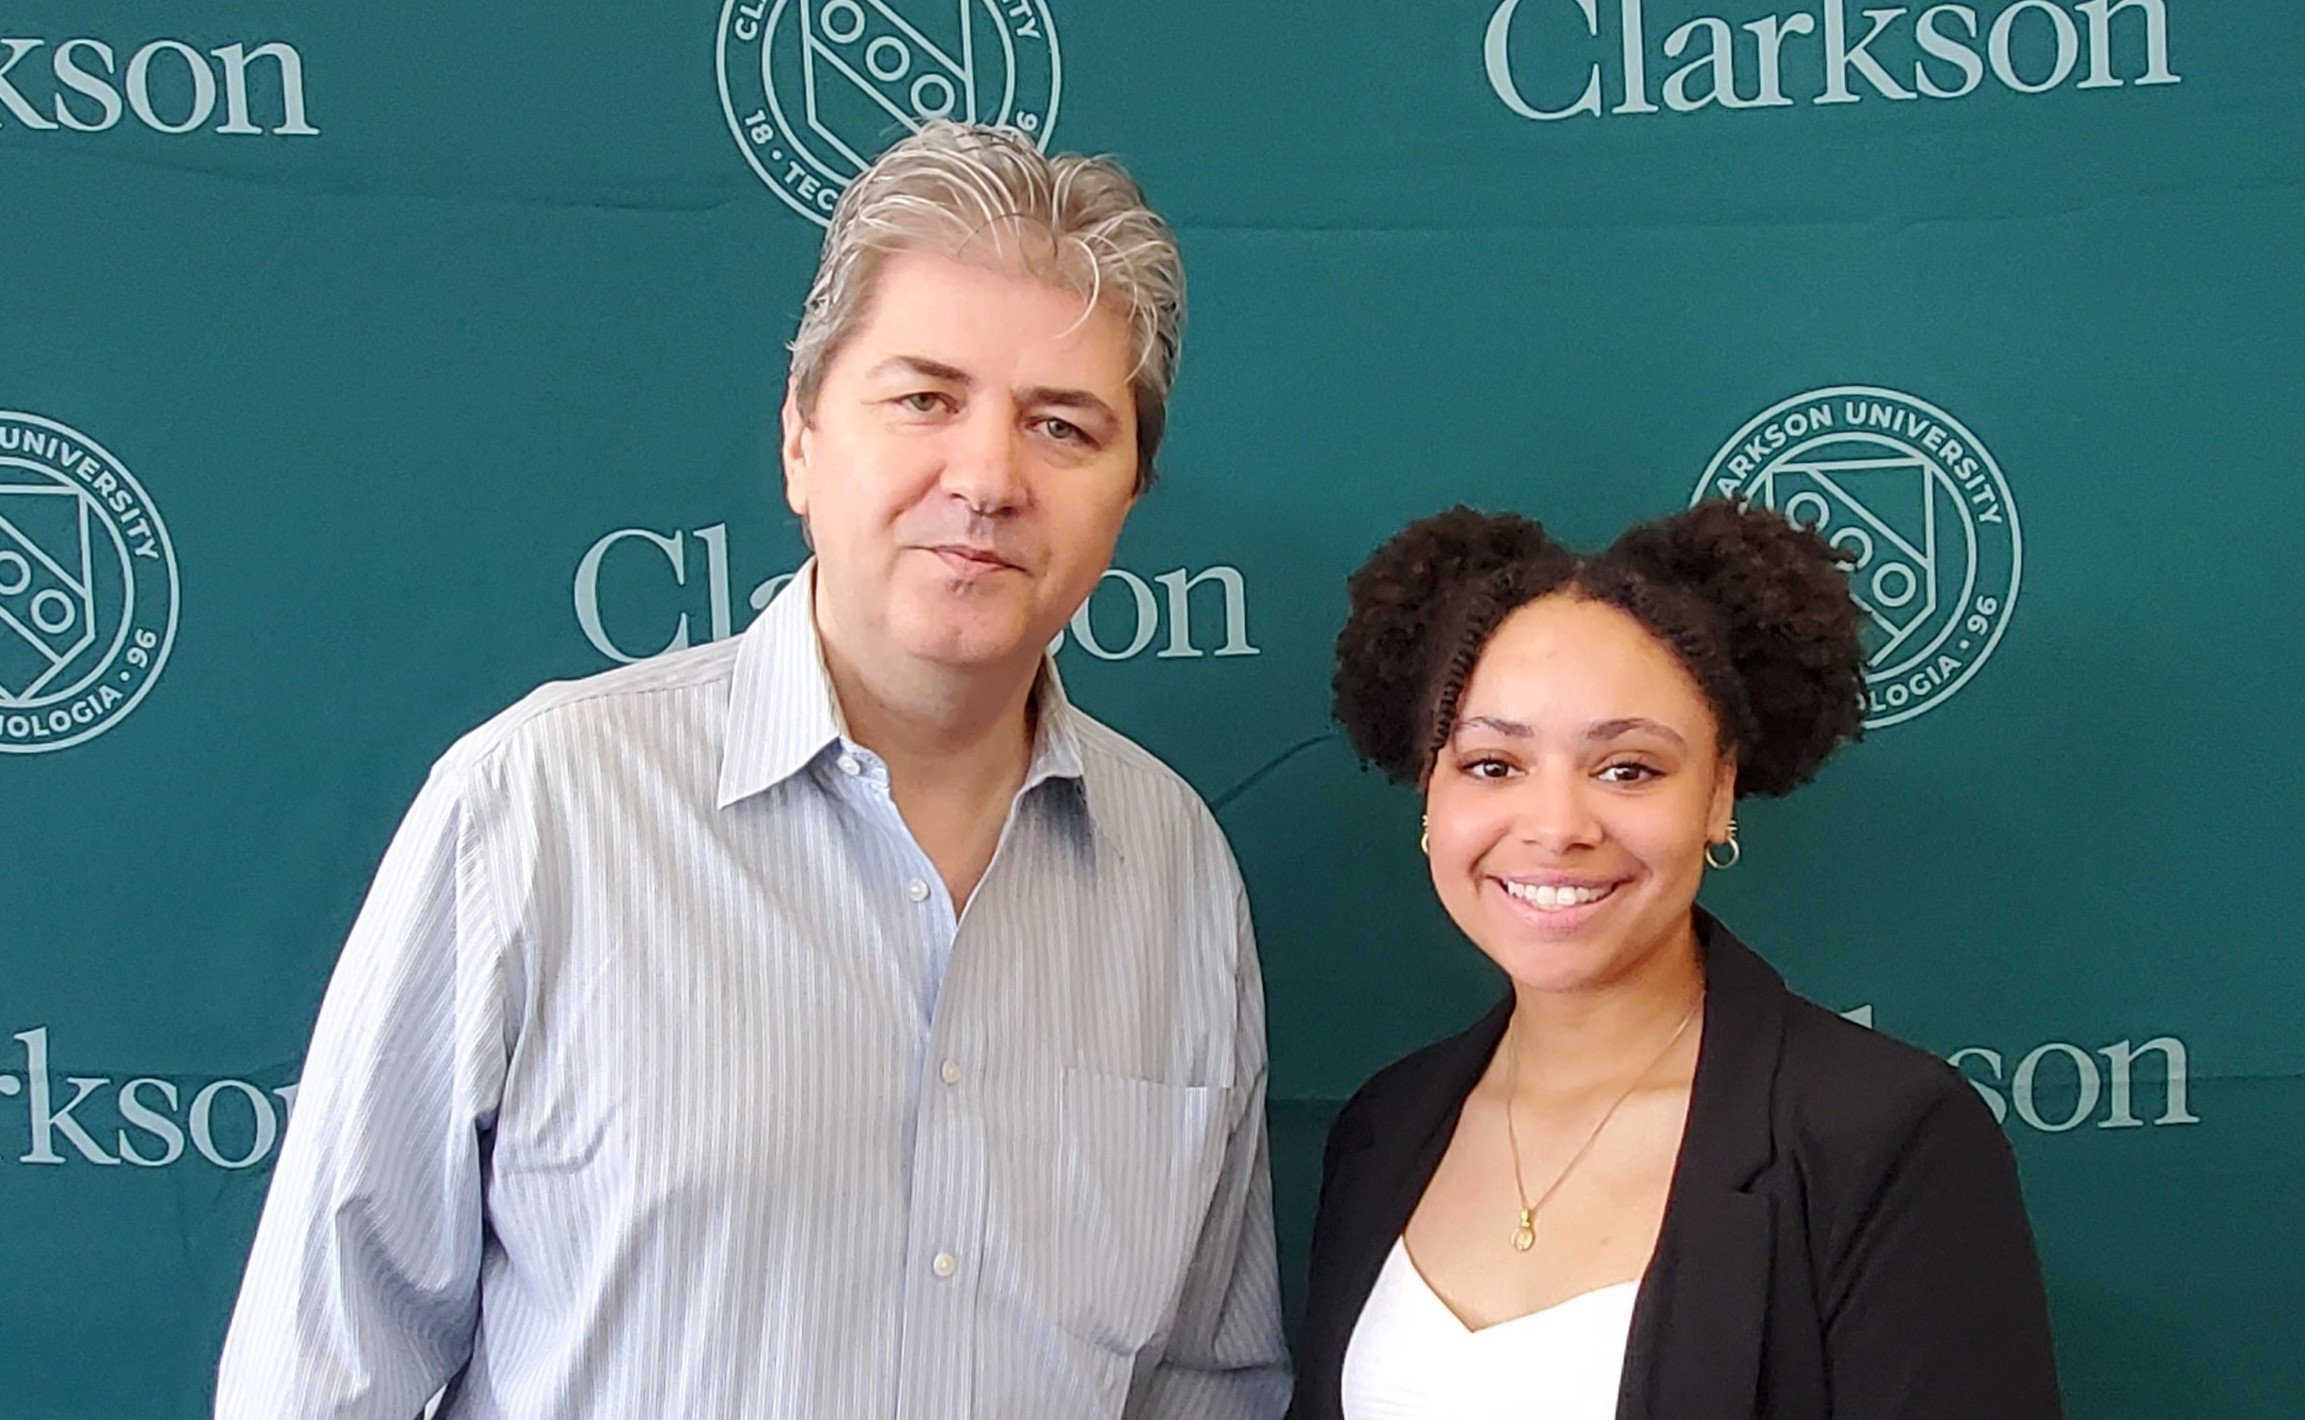 Costel Darie and Kaya Johnson posing for a photo in front of a Clarkson University media backdrop